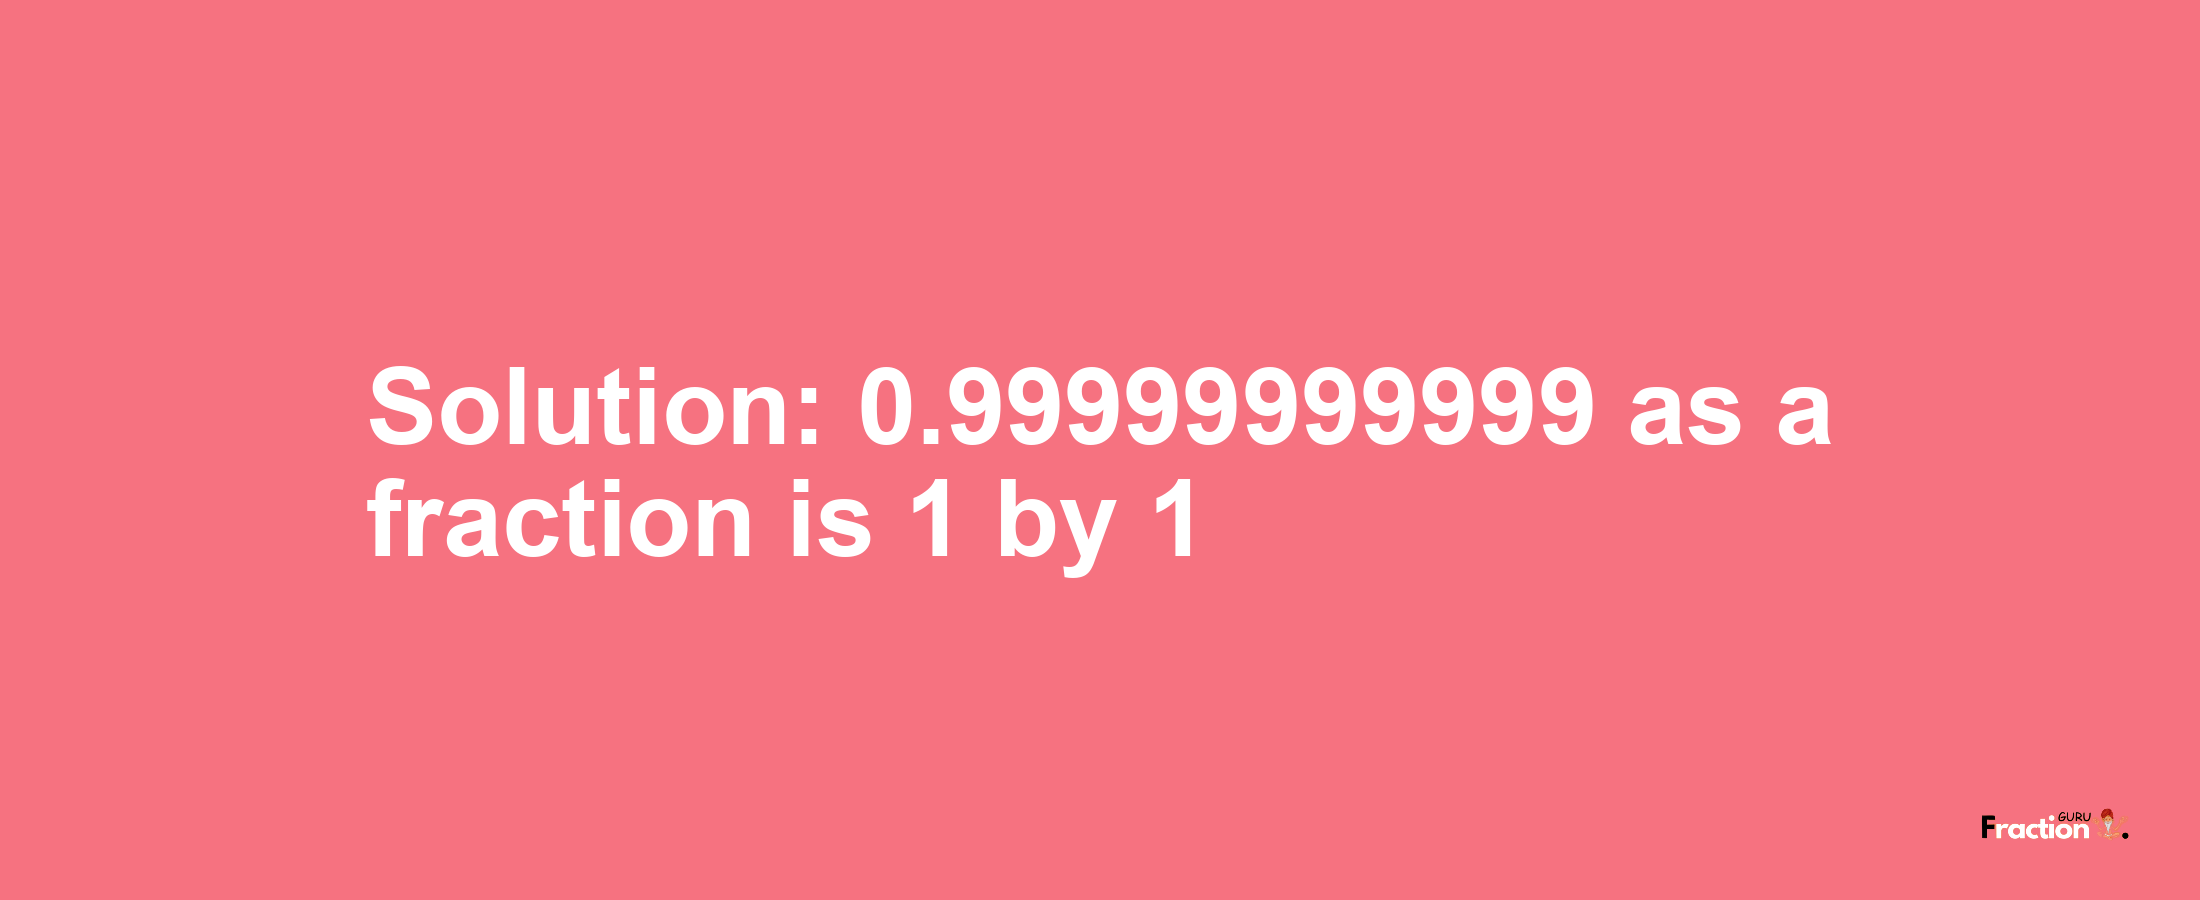 Solution:0.99999999999 as a fraction is 1/1